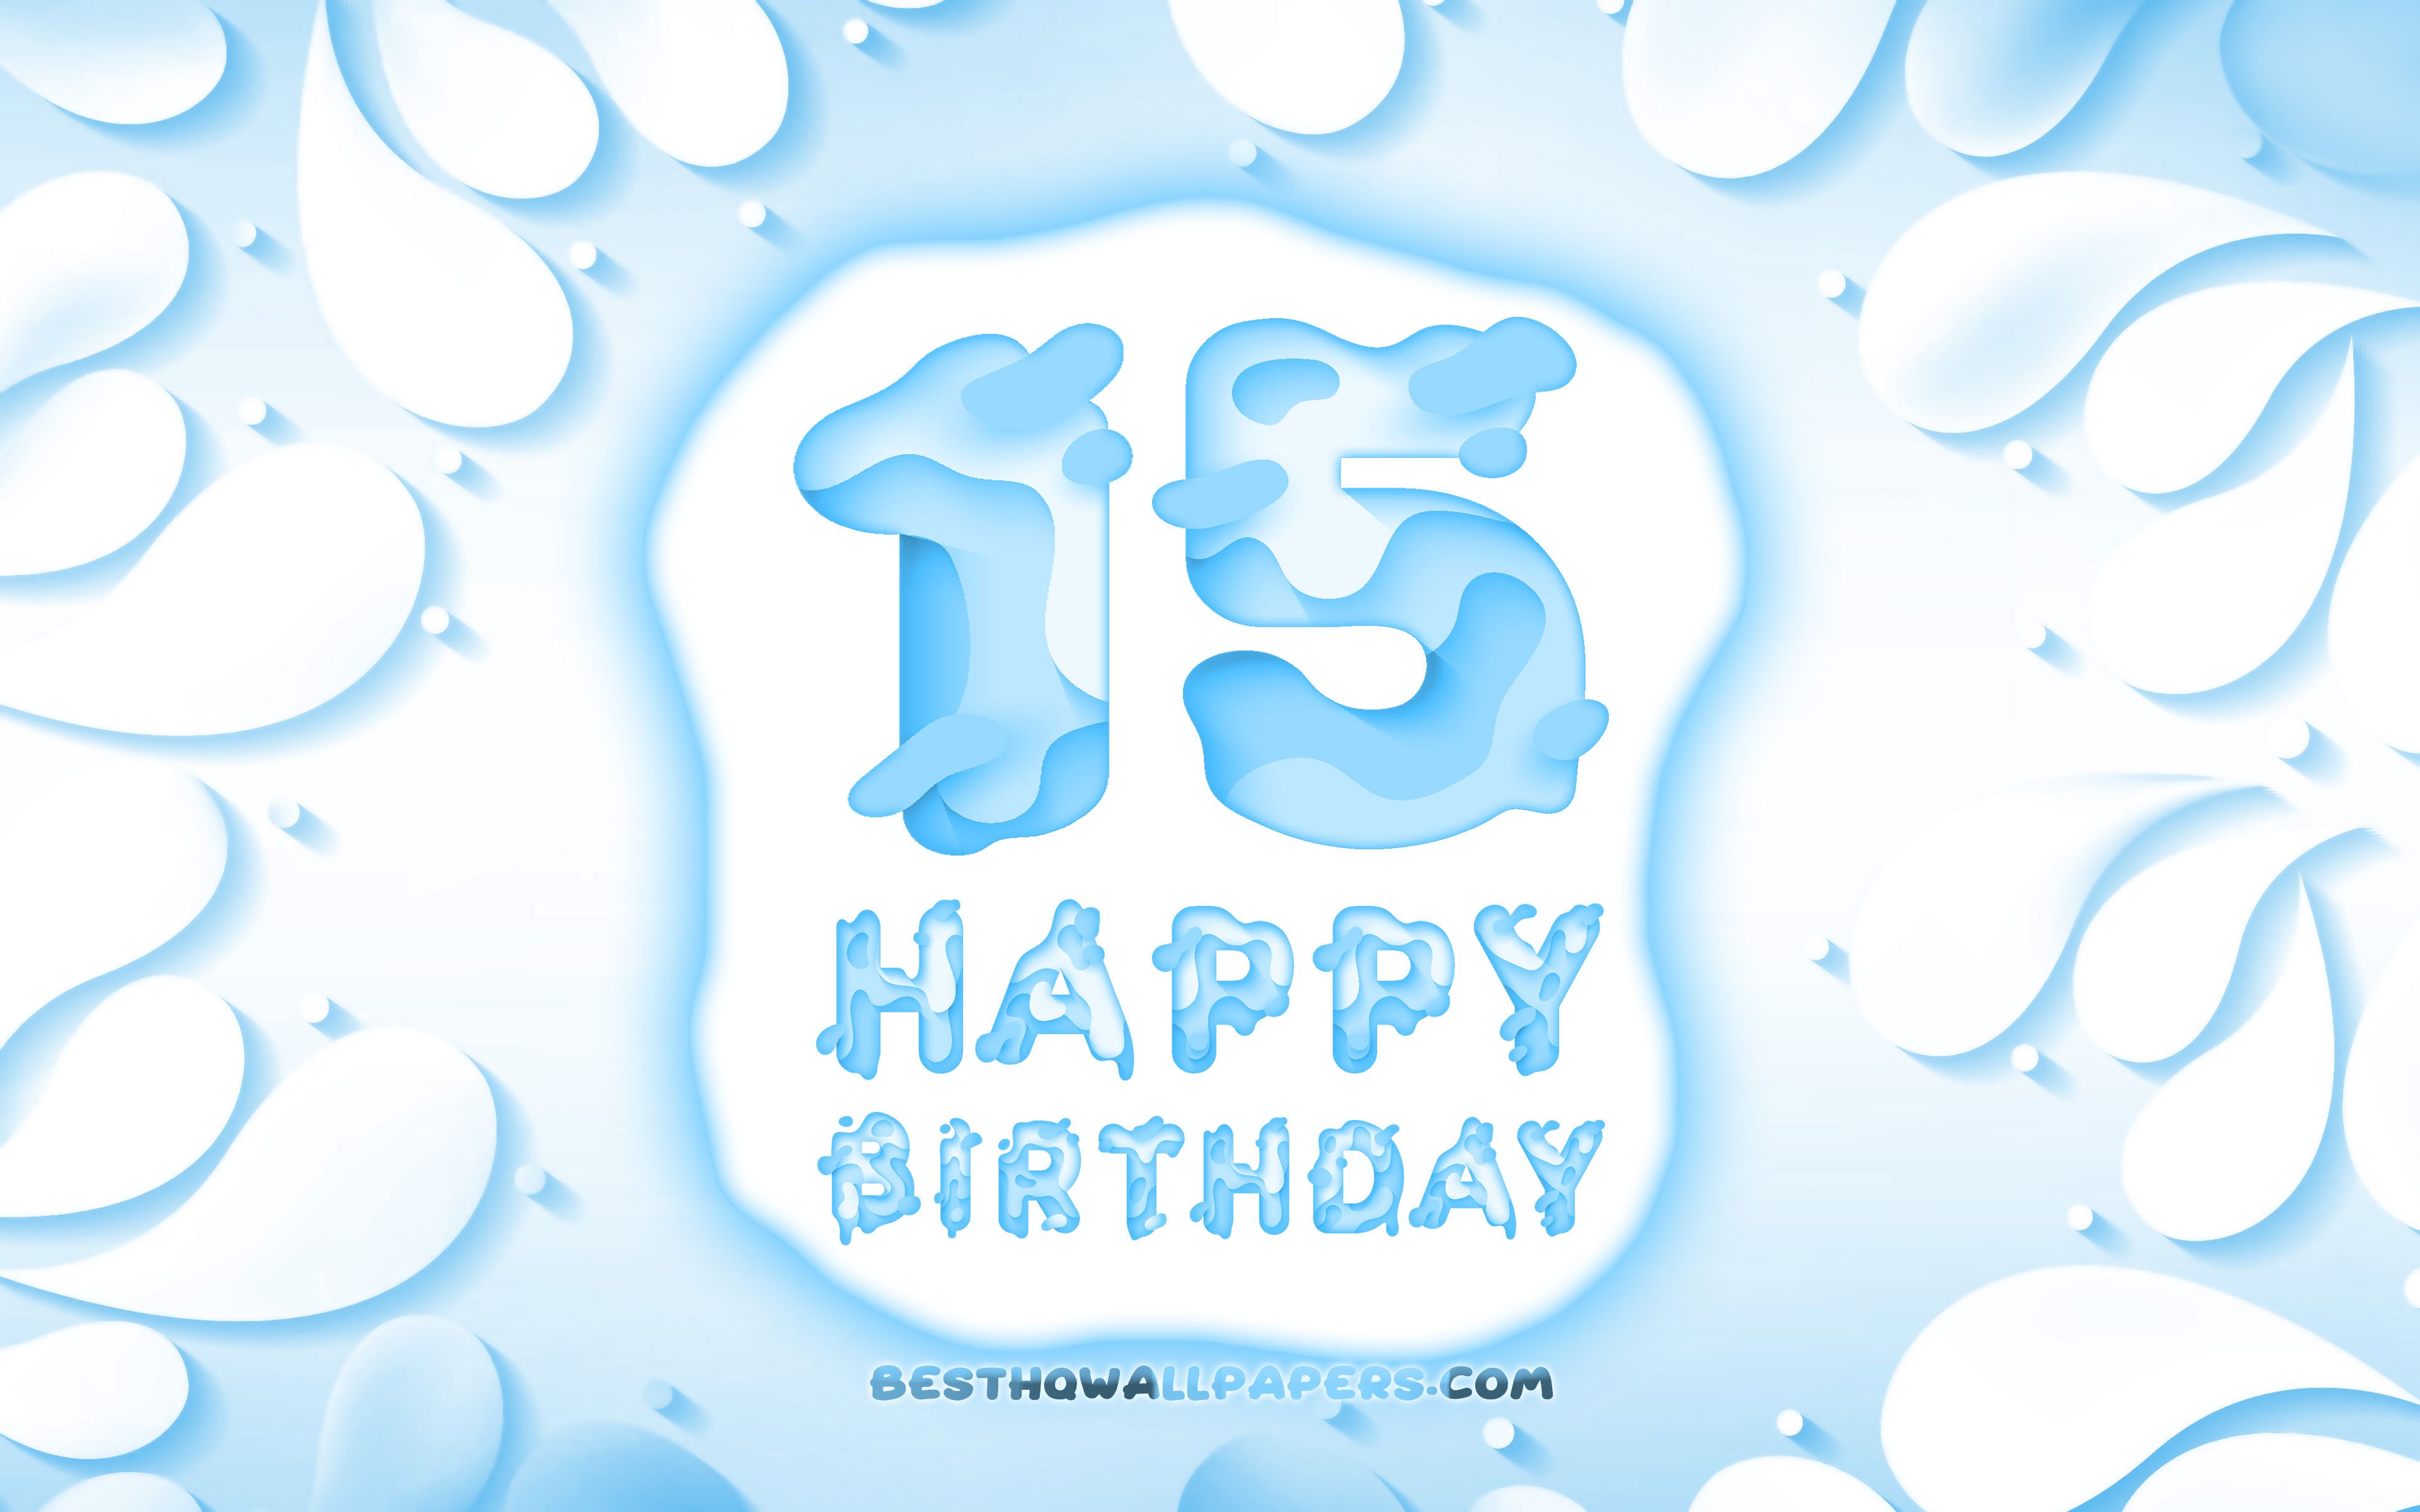 Download wallpaper Happy 15 Years Birthday, 4k, 3D petals frame, Birthday Party, blue background, Happy 15th birthday, 3D letters, 15th Birthday Party, Birthday concept, artwork, 15th Birthday for desktop with resolution 3840x2400